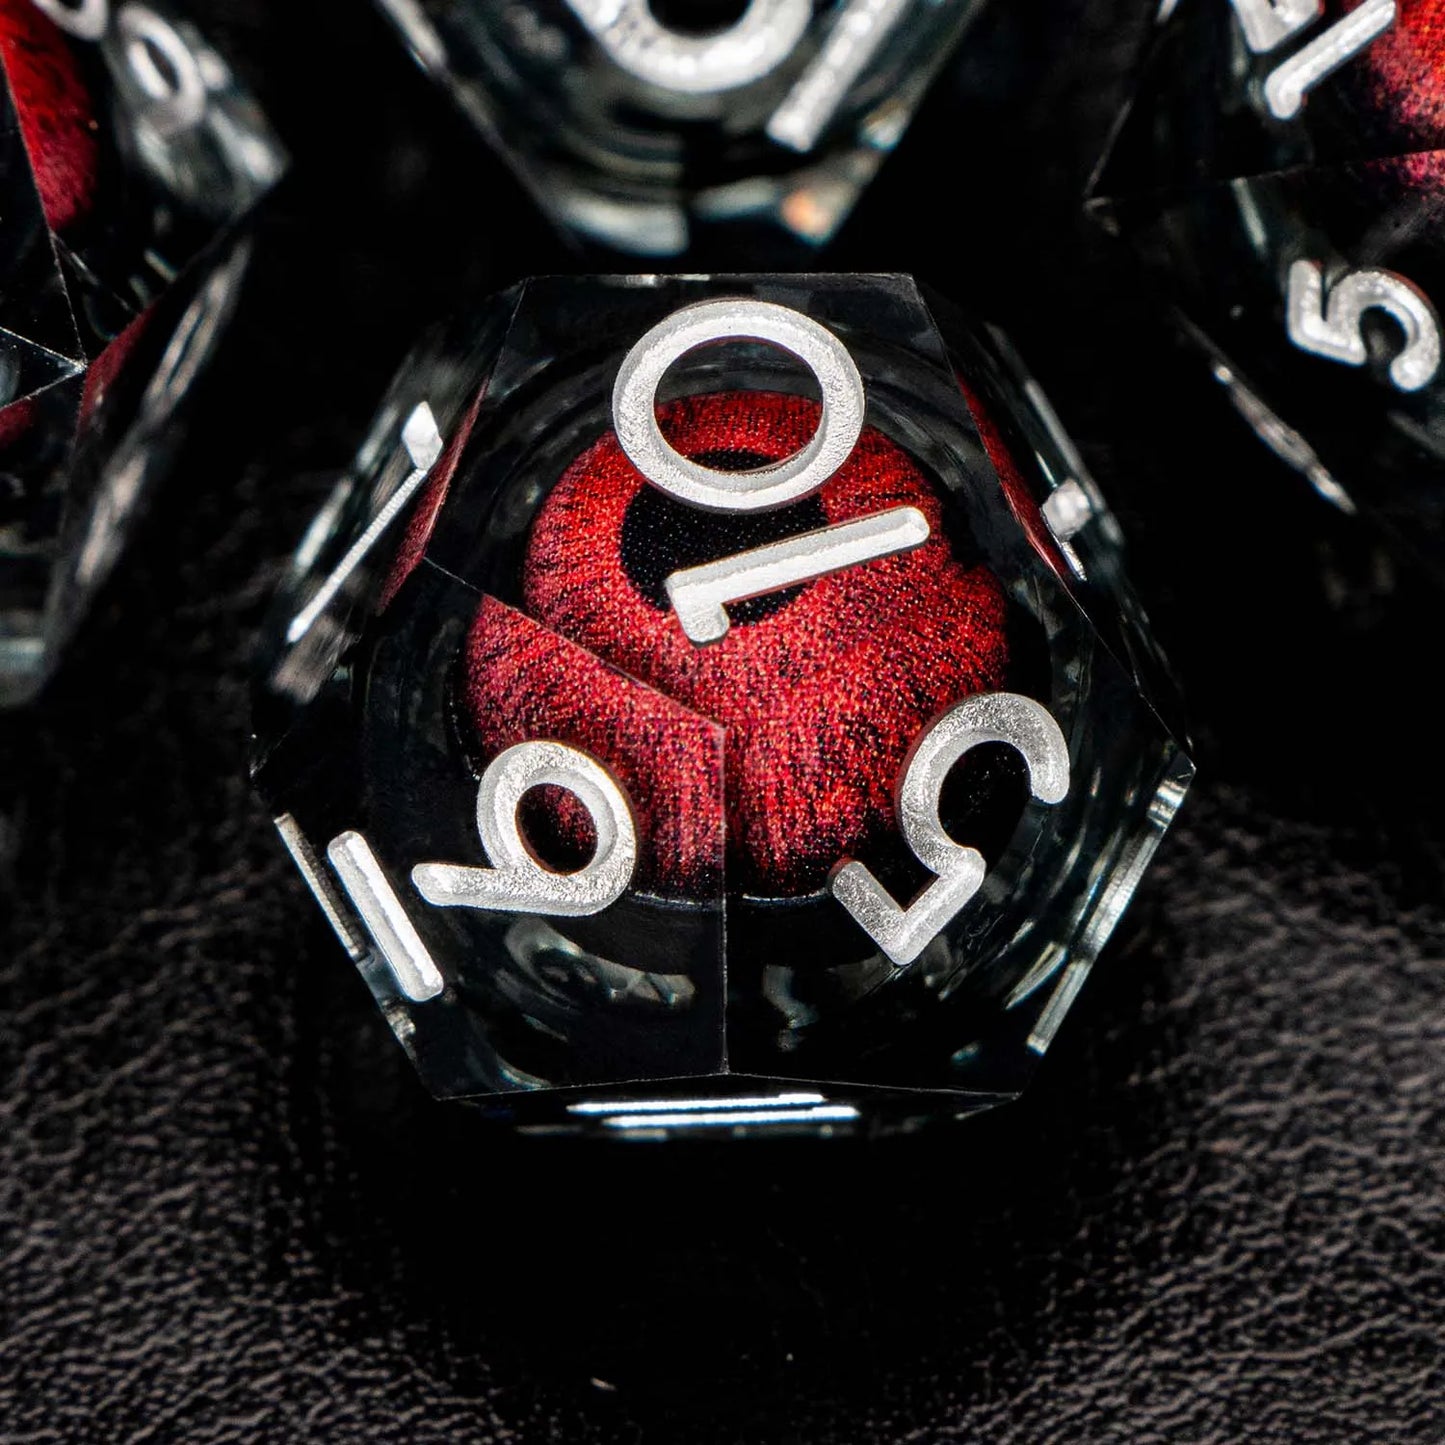 D and D Liquid Flow Core Eye Resin Dice Set | Dnd Dungeon and Dragon Pathfinder Role Playing Game Dice | D20 D&D Red Black Dice